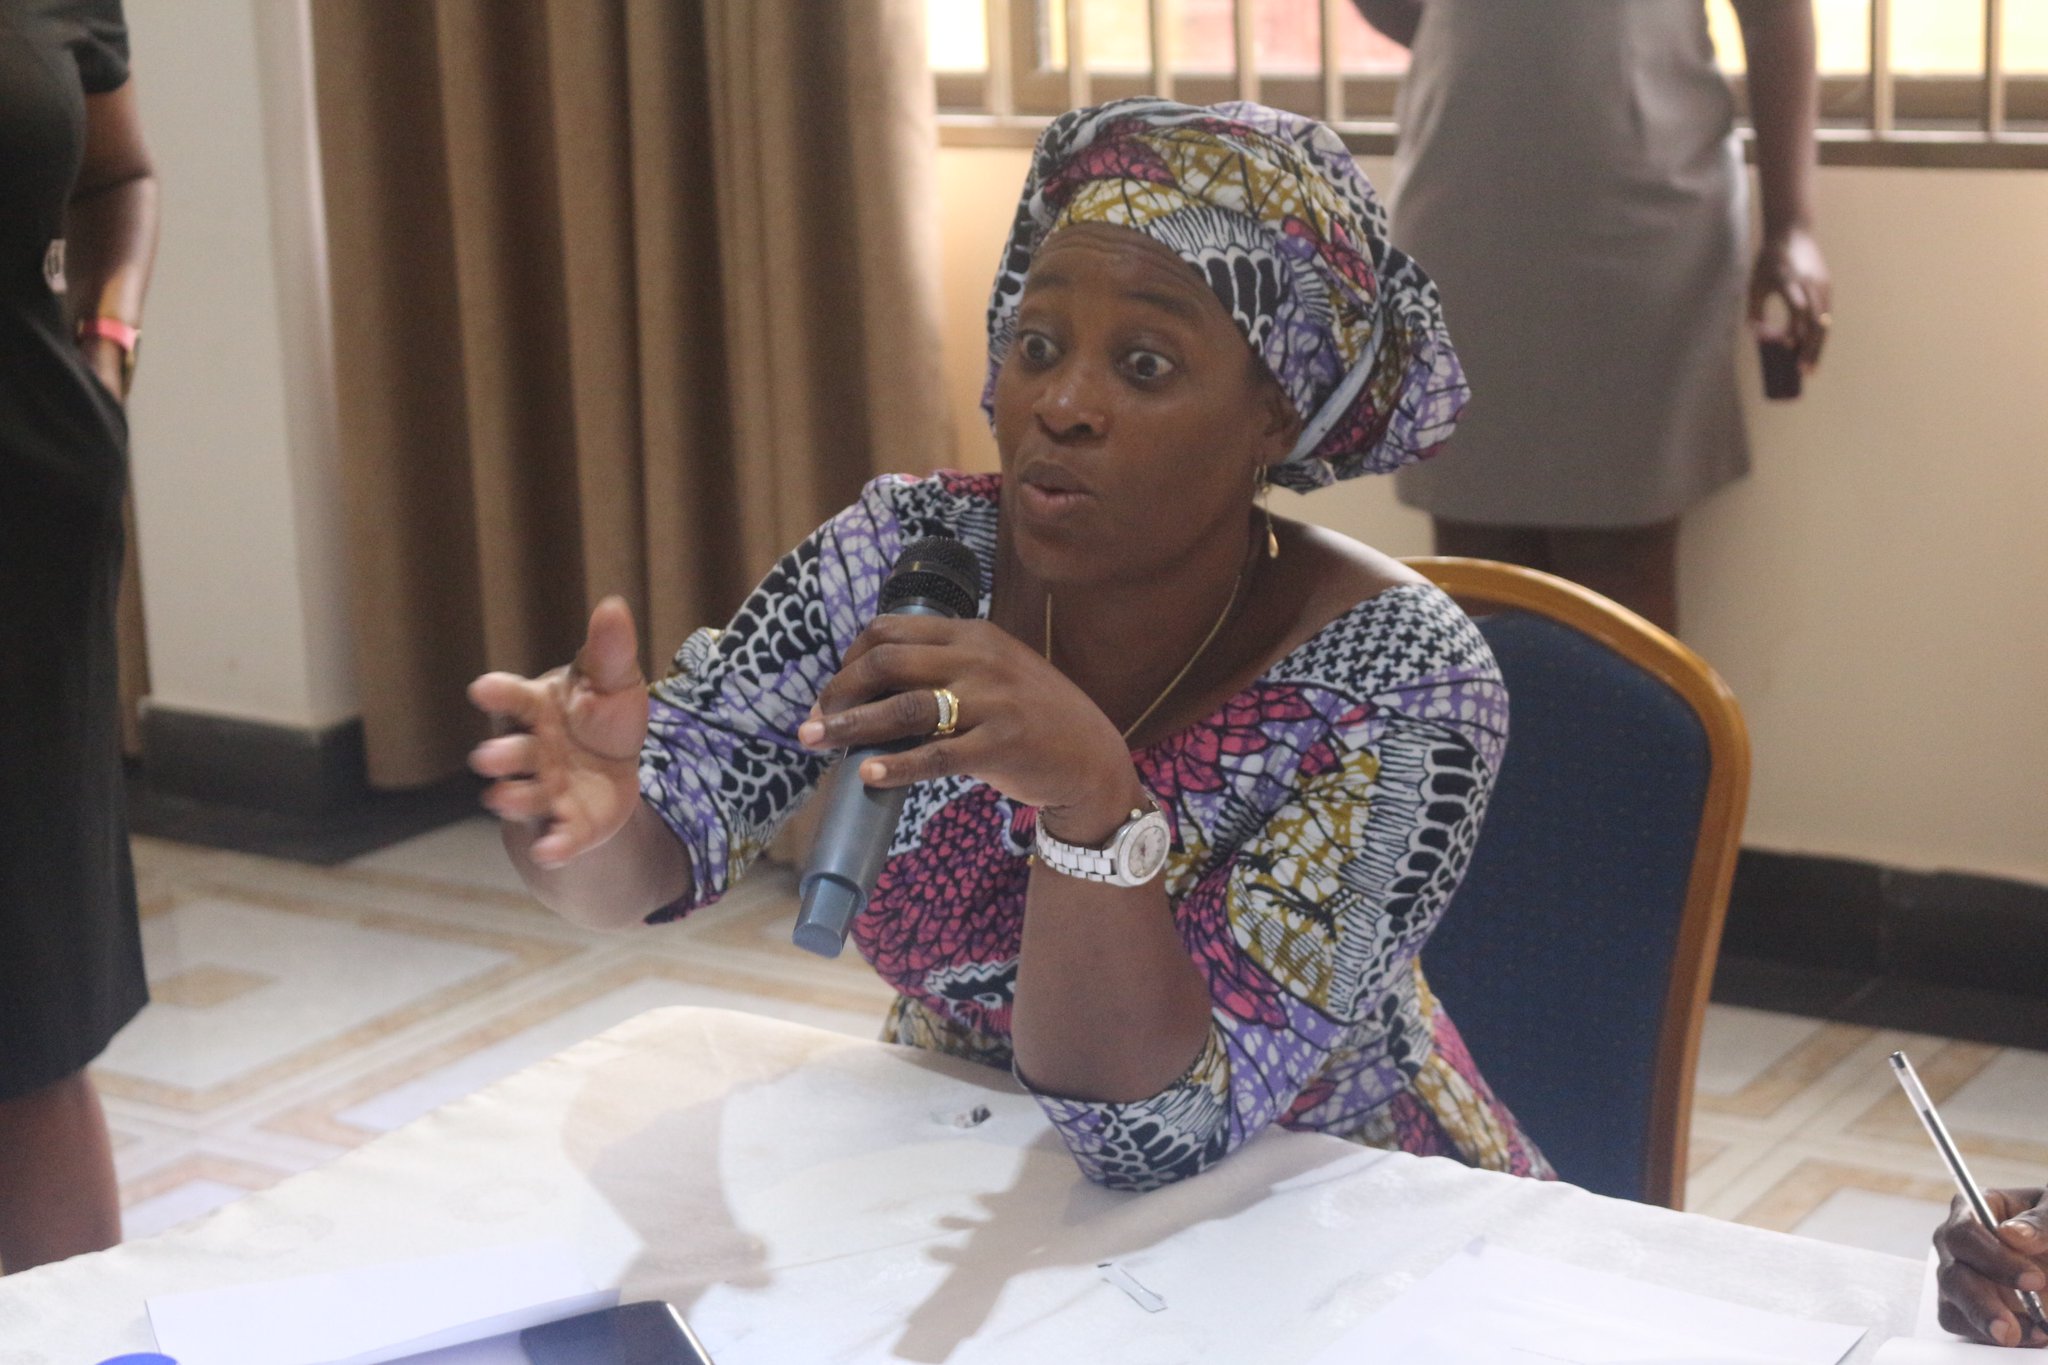 "Women visibility in ASM is a key factor in addressing challenges of women miners" -Amina Tahiru, WIM
@fittwittar @IIED @gabyfz https://t.co/XhHMnWyqgV